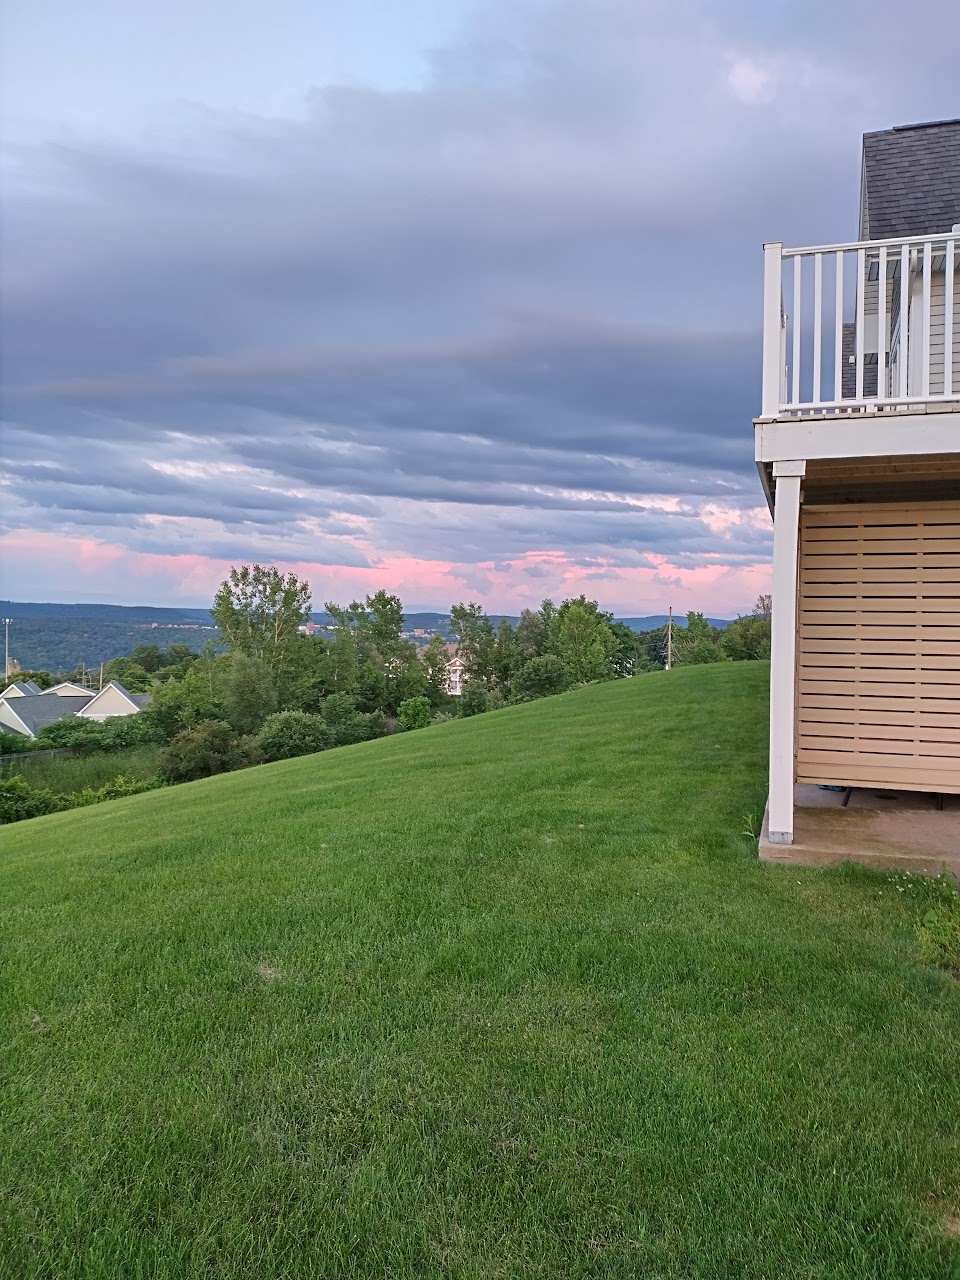 Photo of THE OVERLOOK AT WEST HILL I at 120 W HILL CIR ITHACA, NY 14850